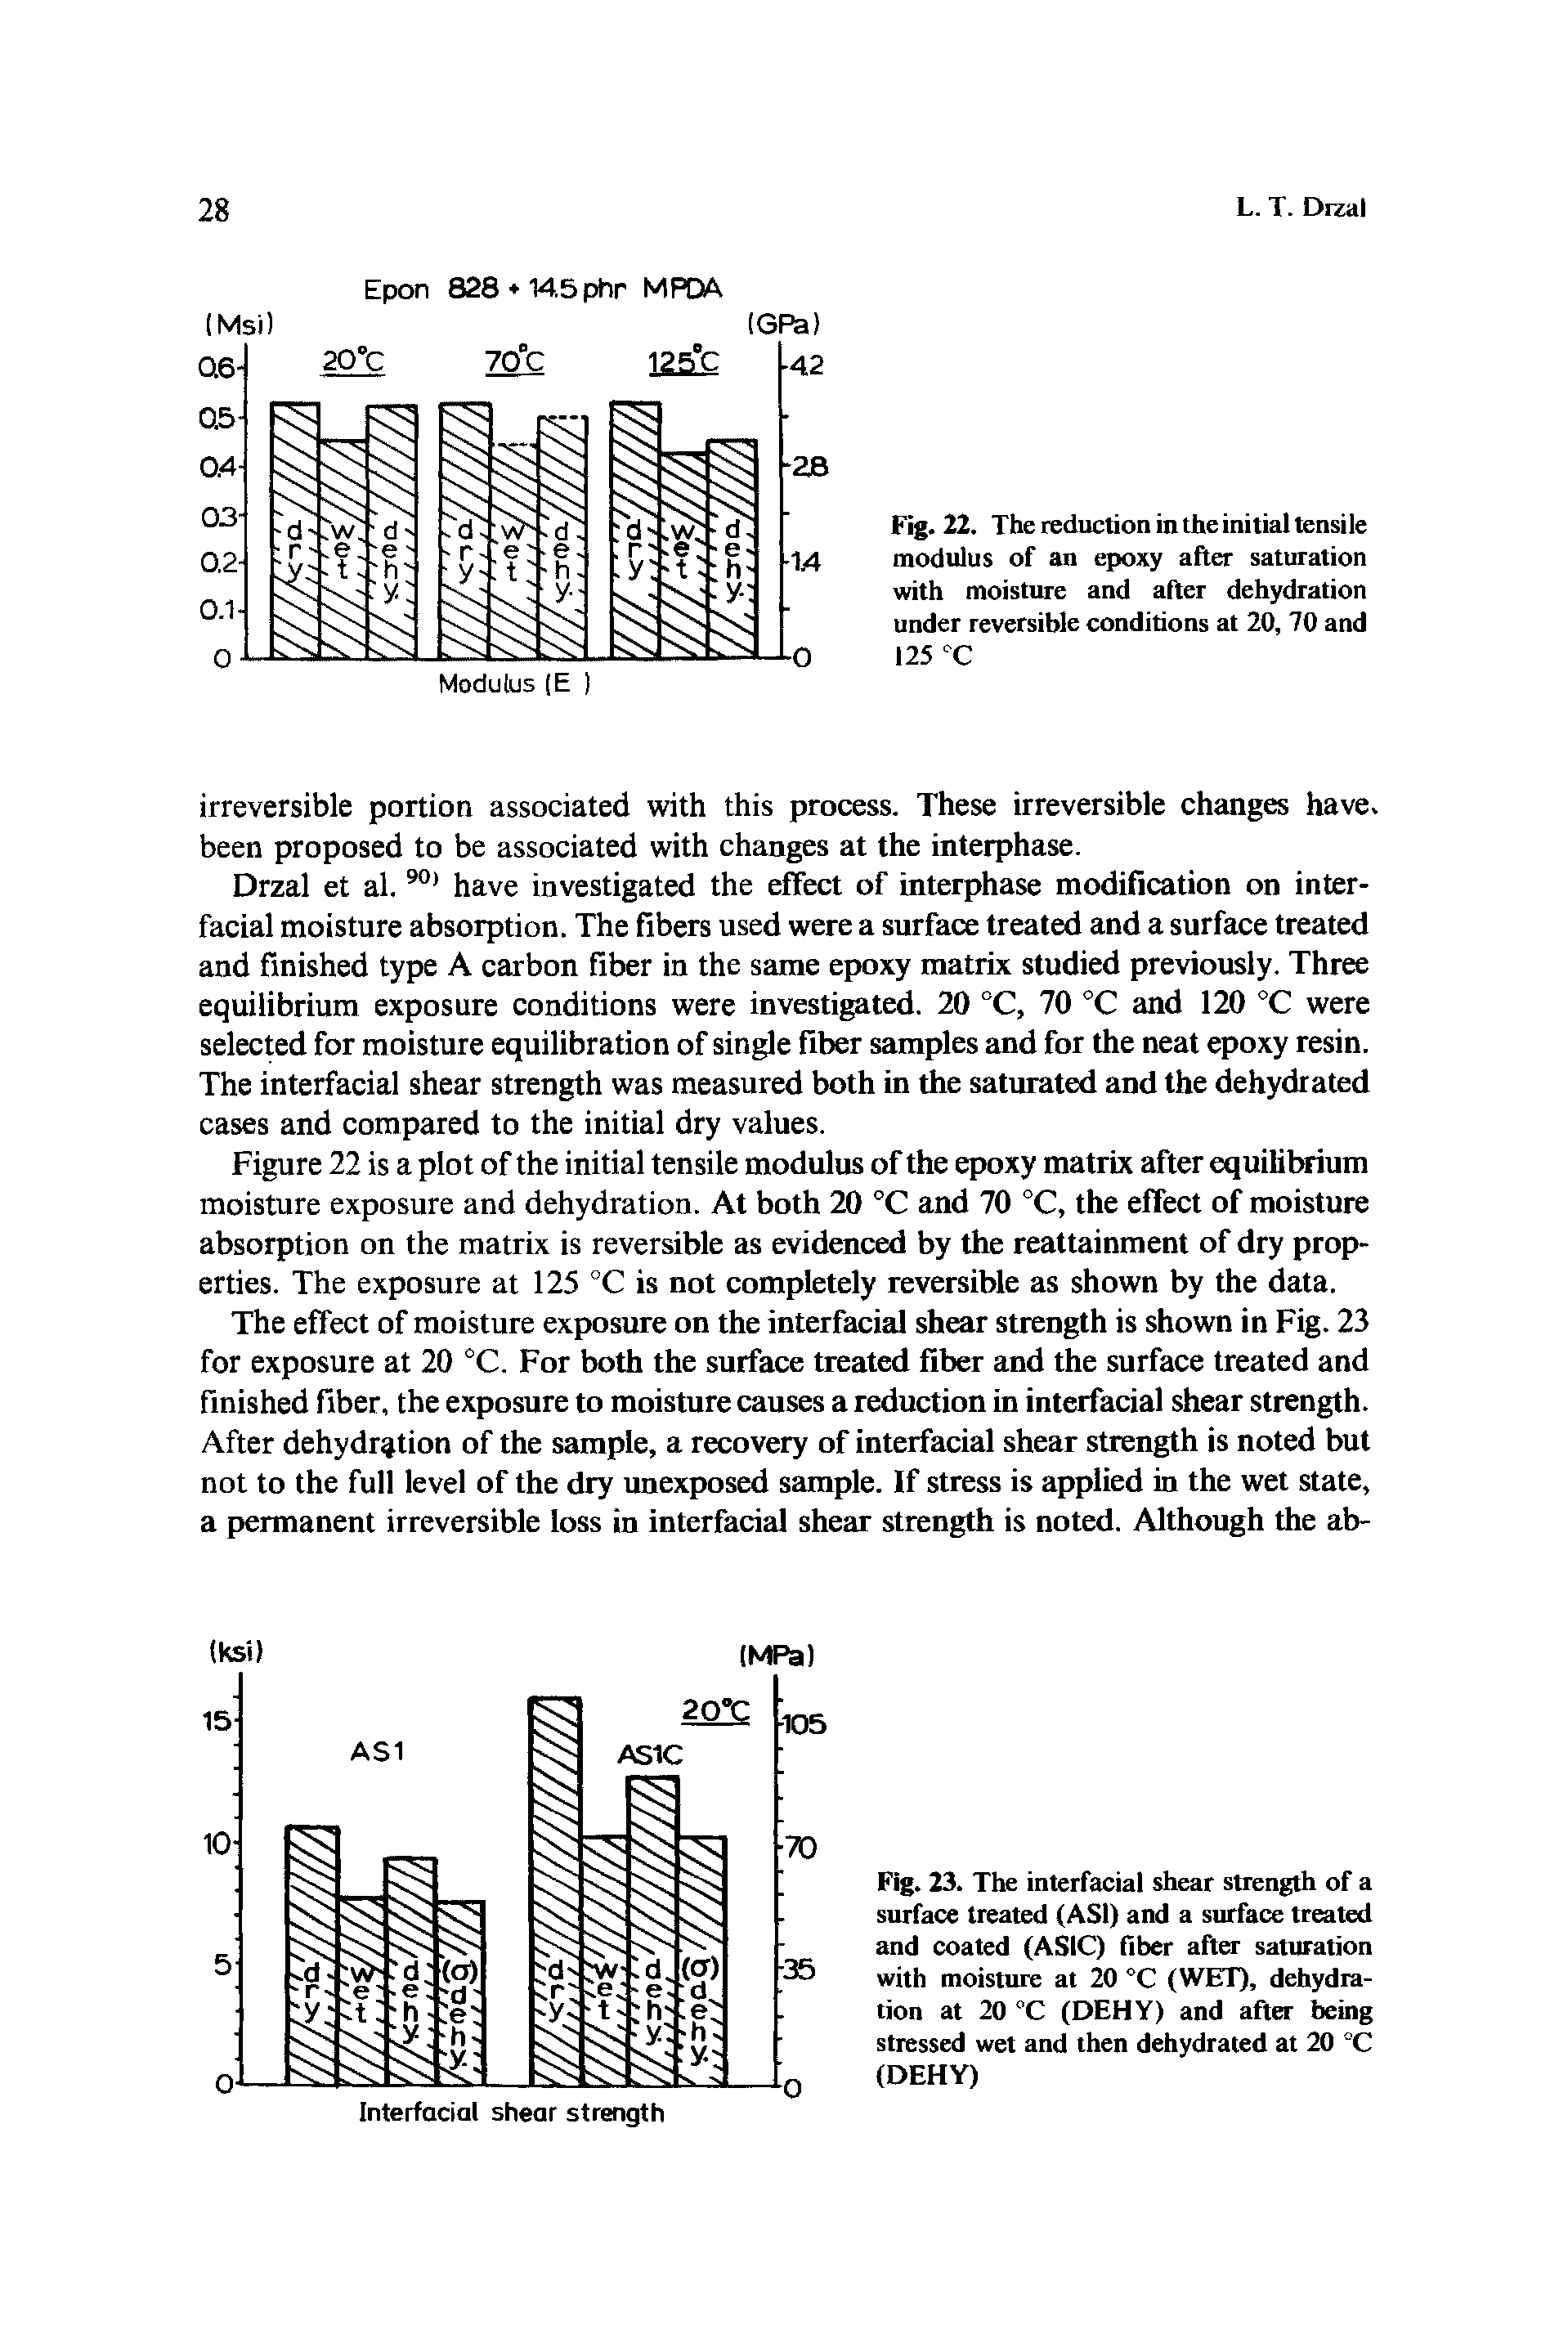 Fig. 22. The reduction in the initial tensile modulus of an epoxy after saturation with moisture and after dehydration under reversible conditions at 20, 70 and...